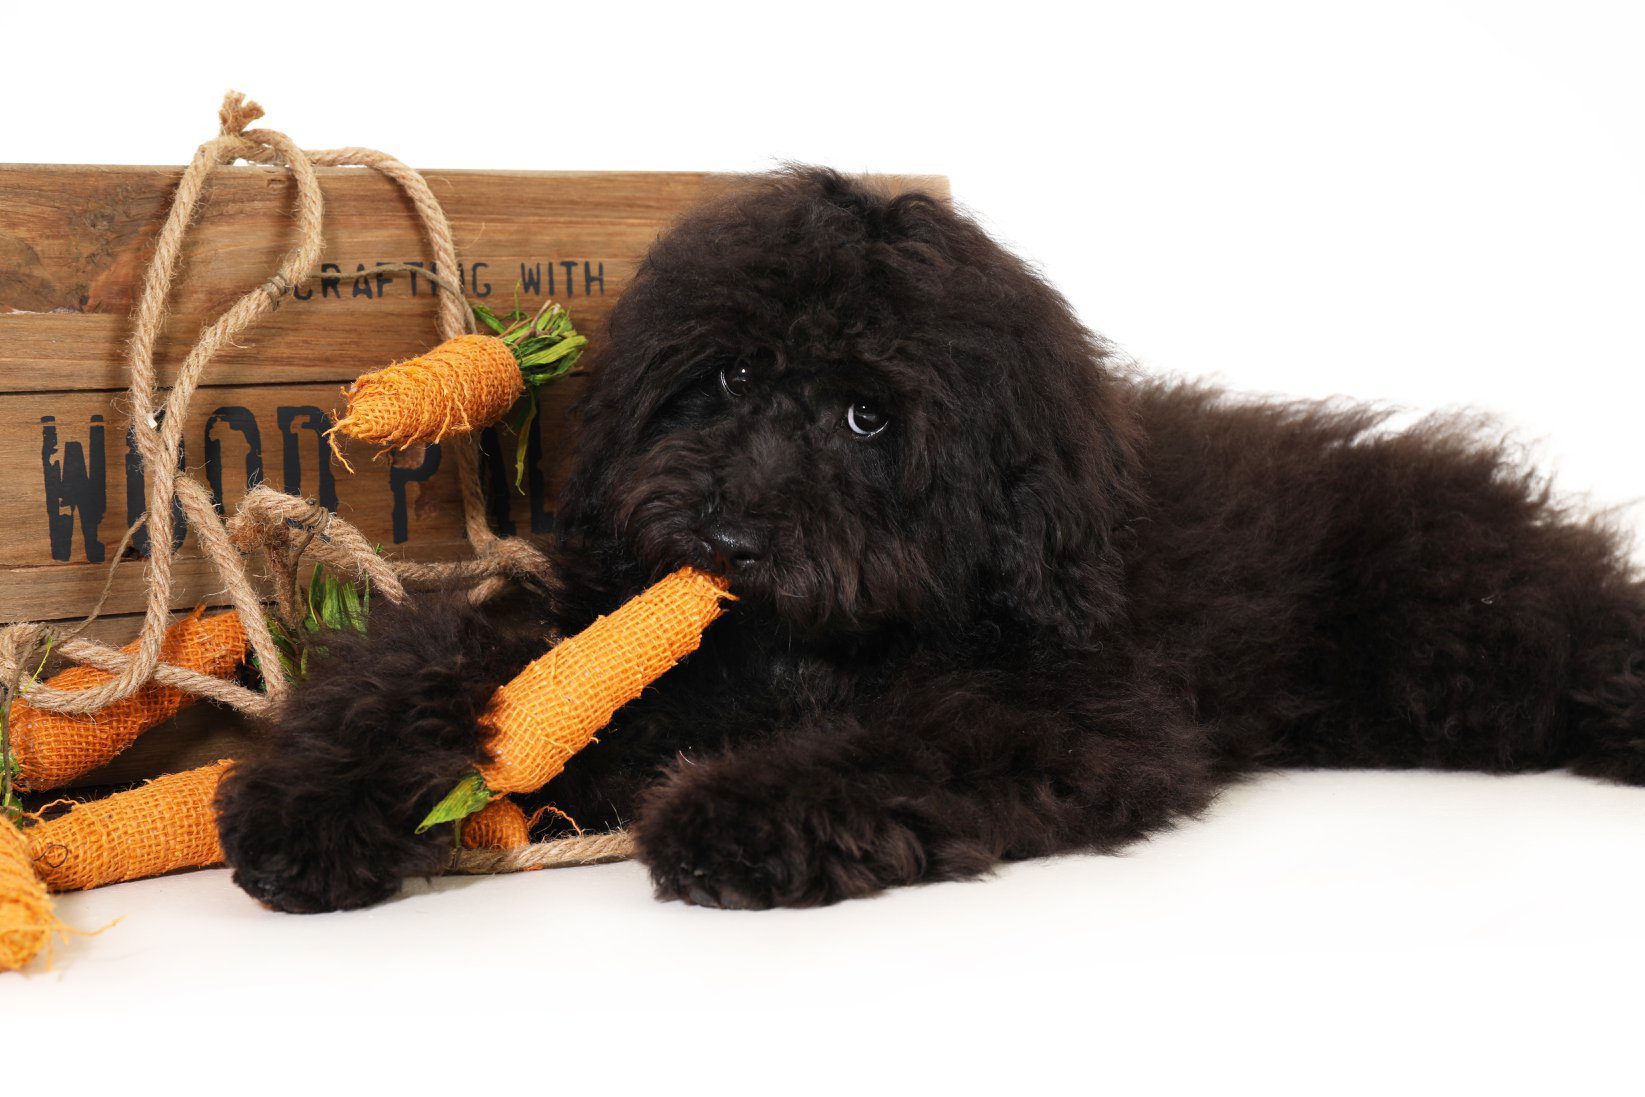 A black golden doodle eating a carrot during his photo shoot.